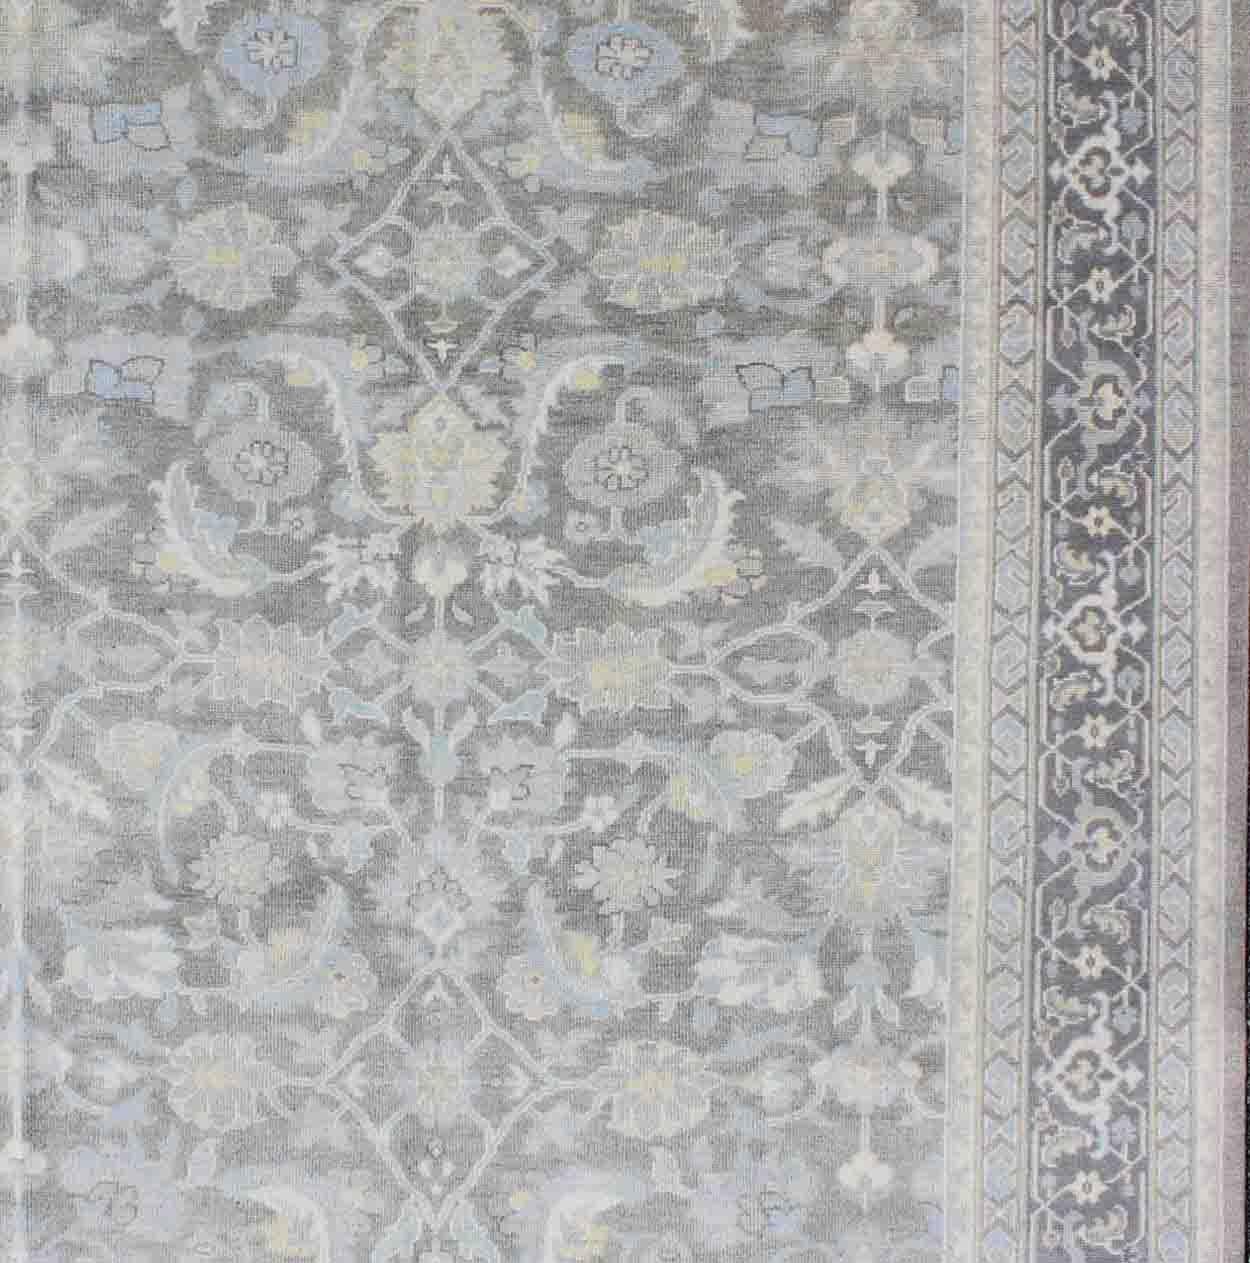 Squared shaped Malayer design rug in gray, silver, light blue and charcoal with all-over geometric design, Keivan Woven Arts/ rug OB-5921, country of origin / type: India/ Malayer.

Measures: 7' x 9'.

This hand knotted Malayer design rug features